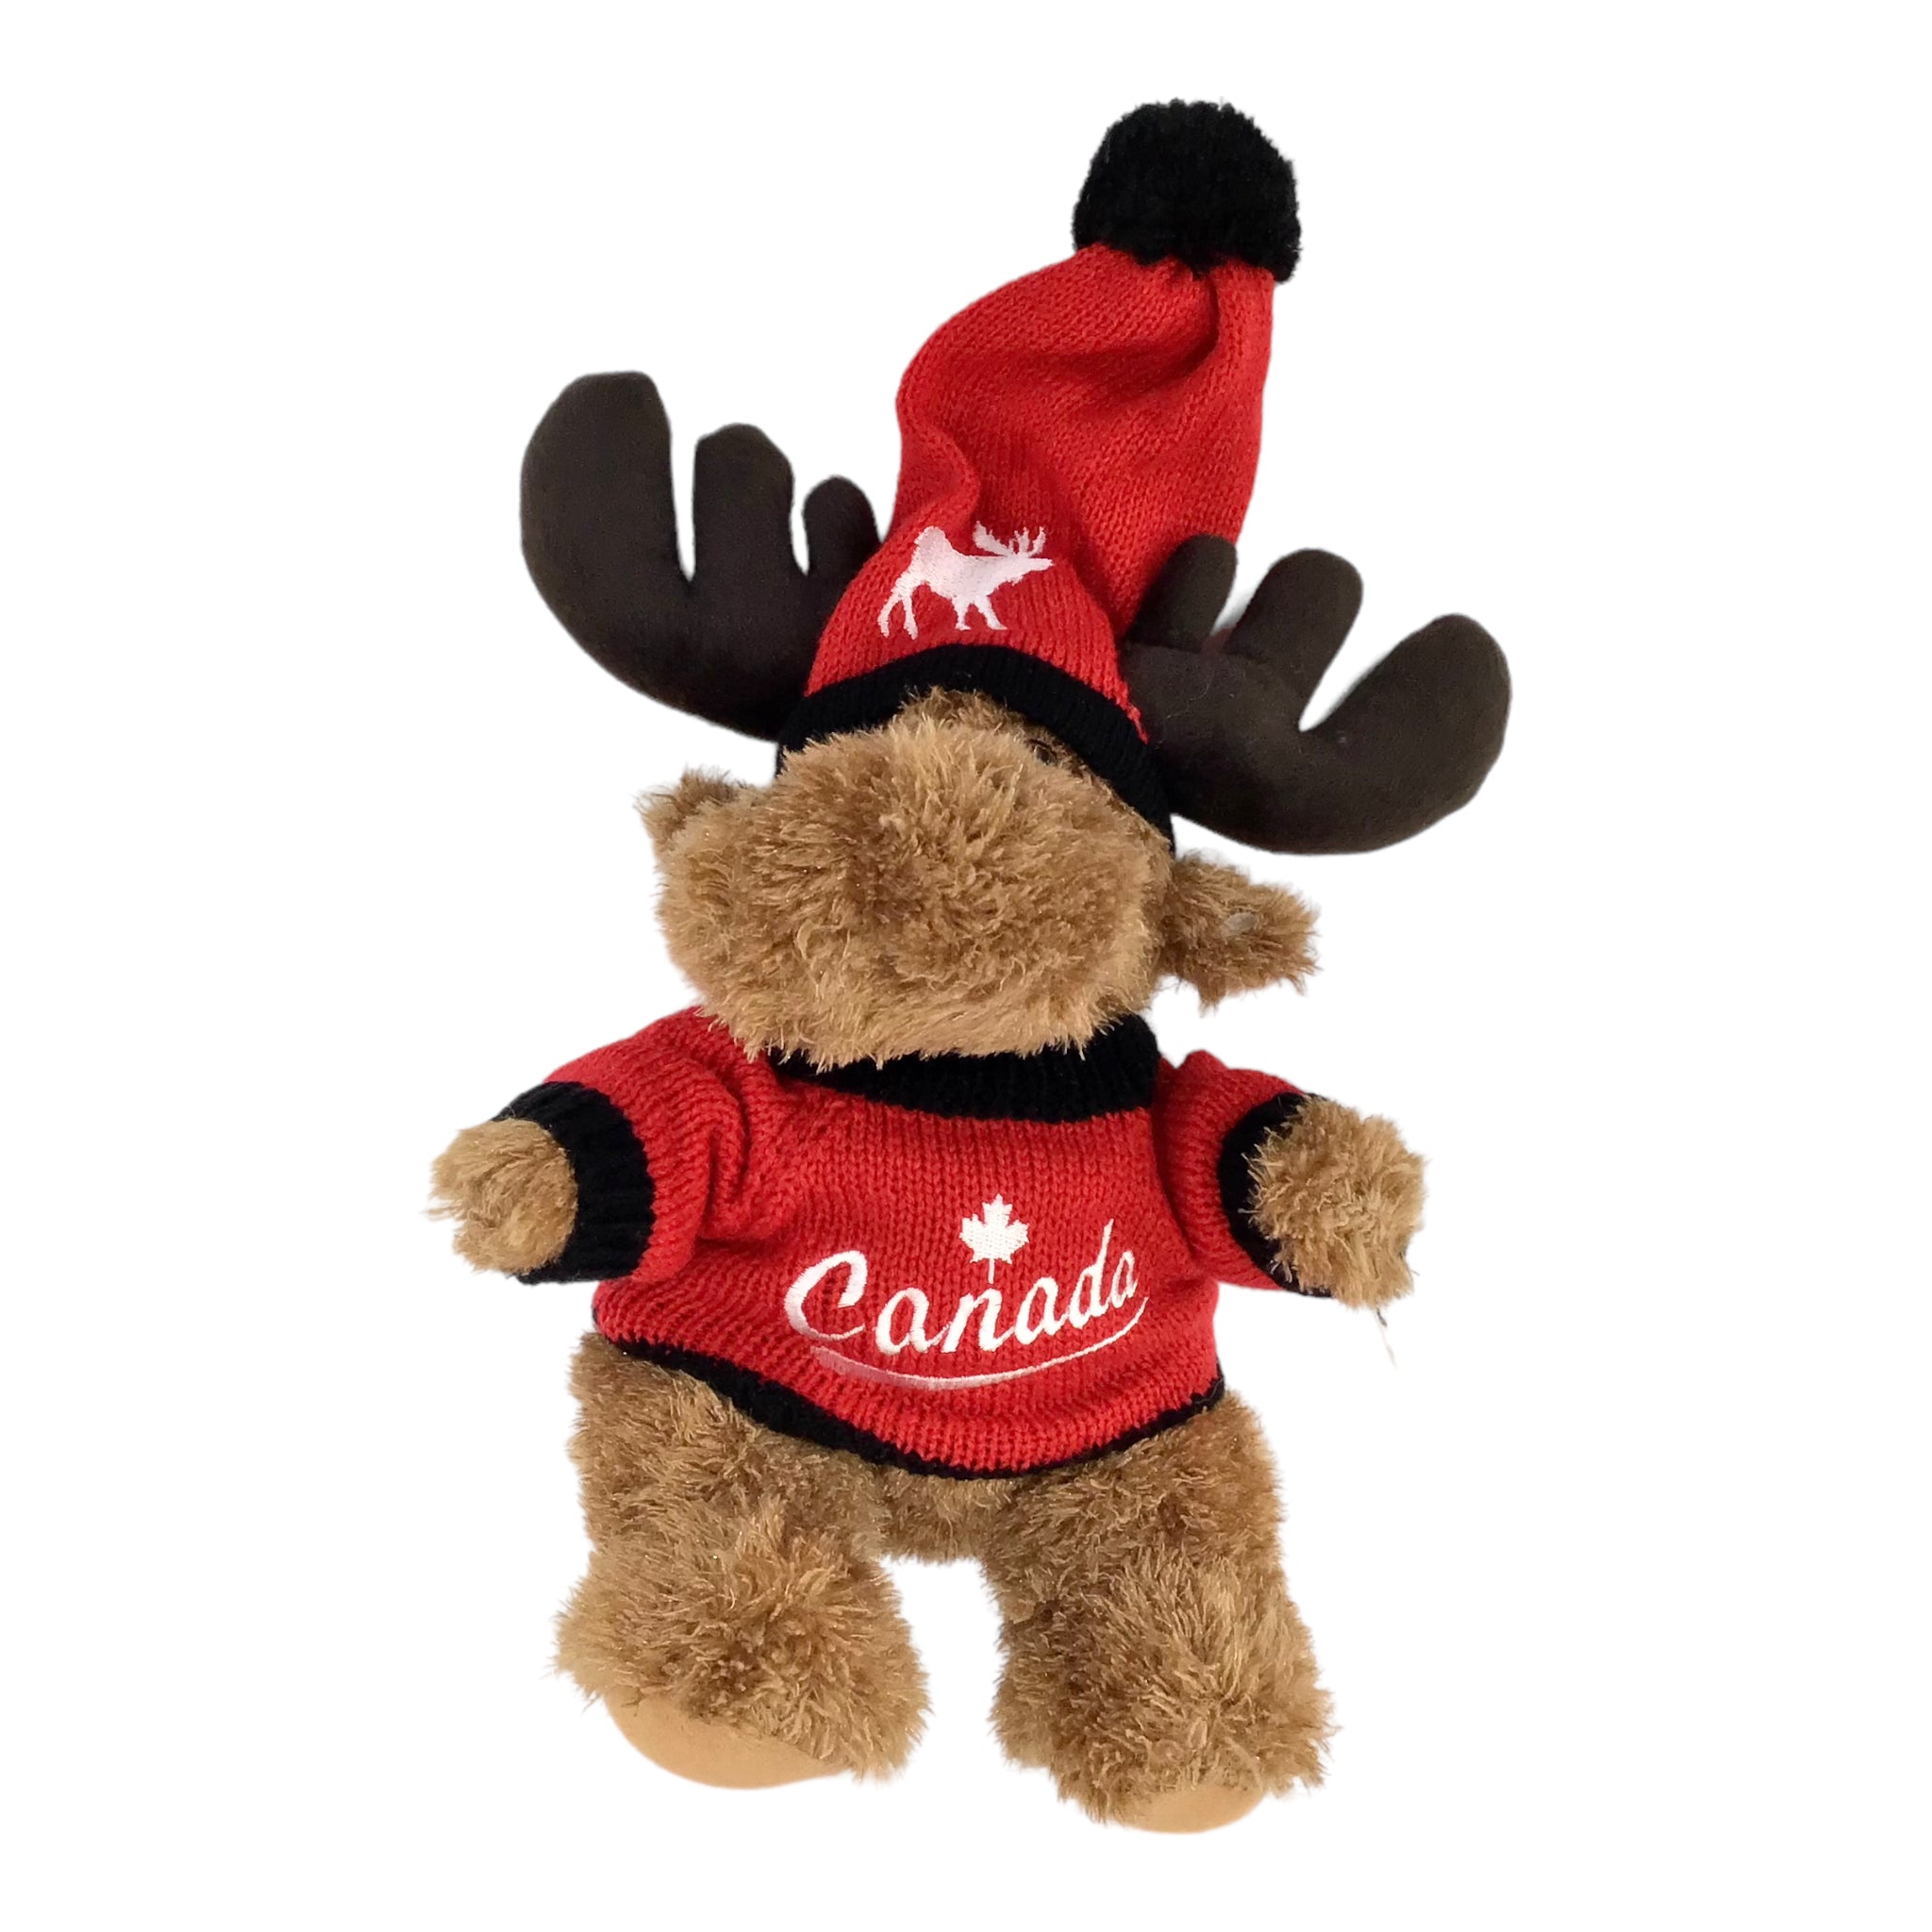 Canadian Moose Stuffed Animal W/ Red Sweater and Toque, Canada Moose Themed Design Soft Toy